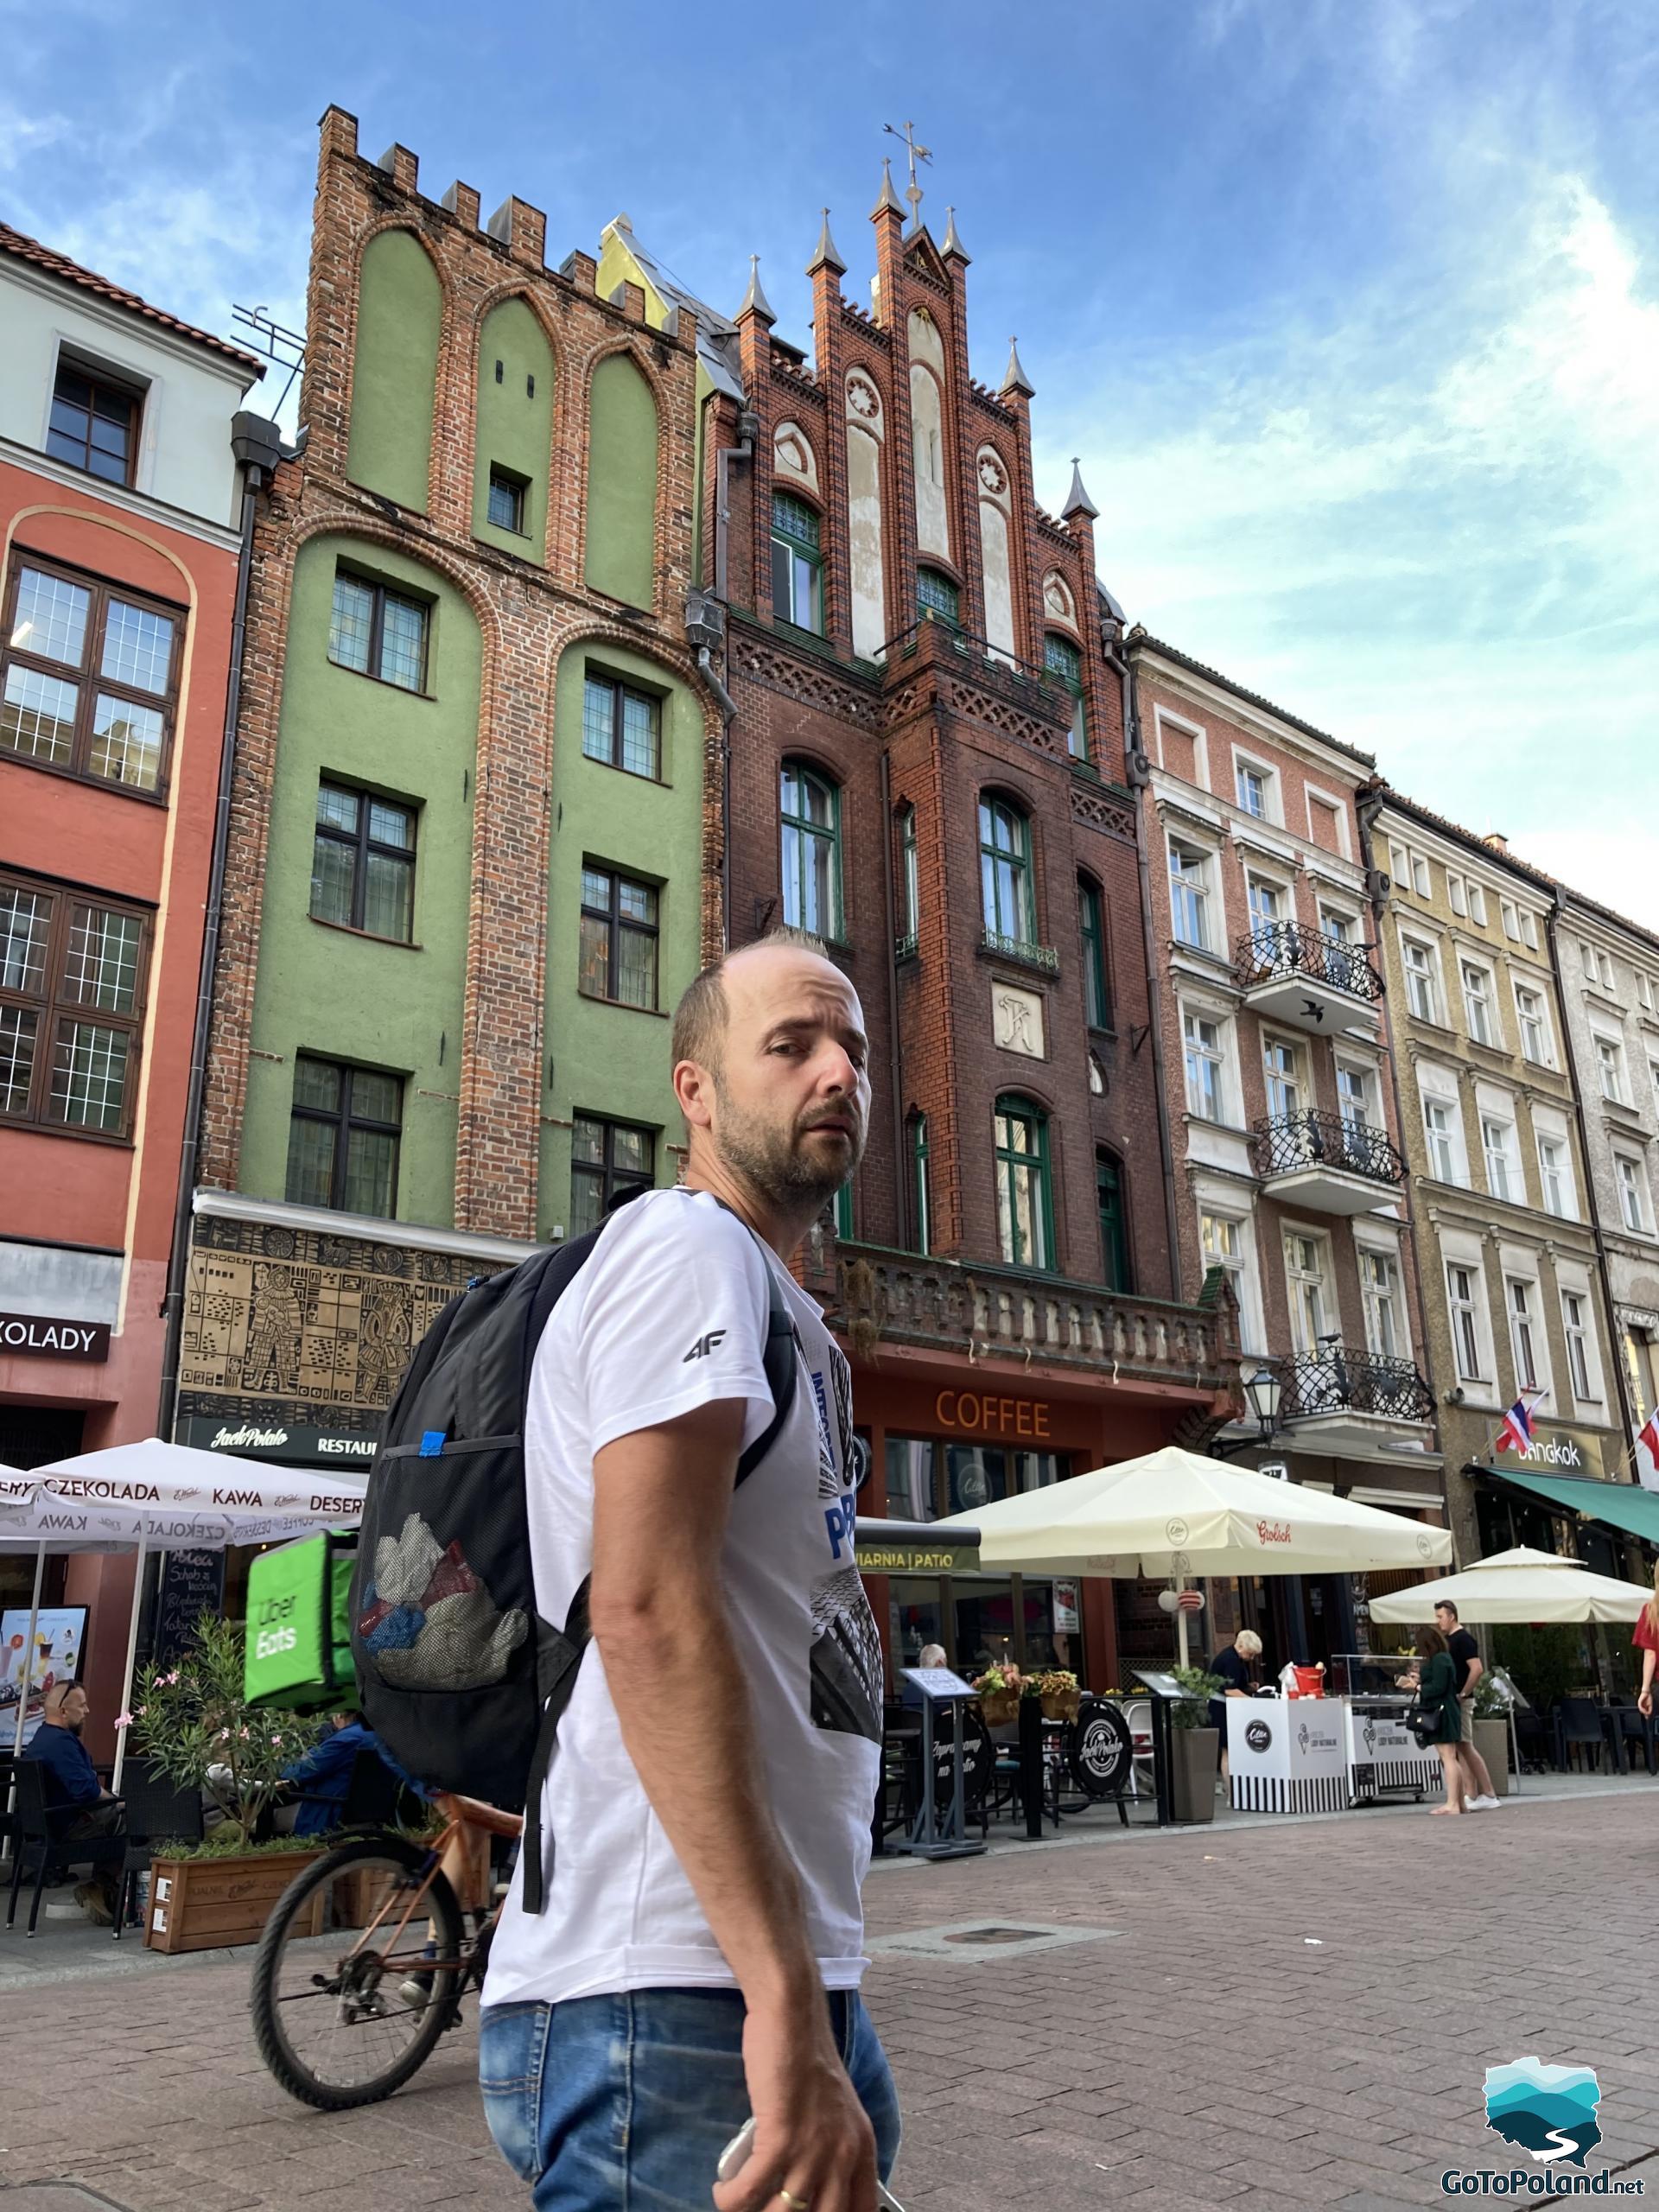 a man is in the foreground, behind him there are colorful tenement houses